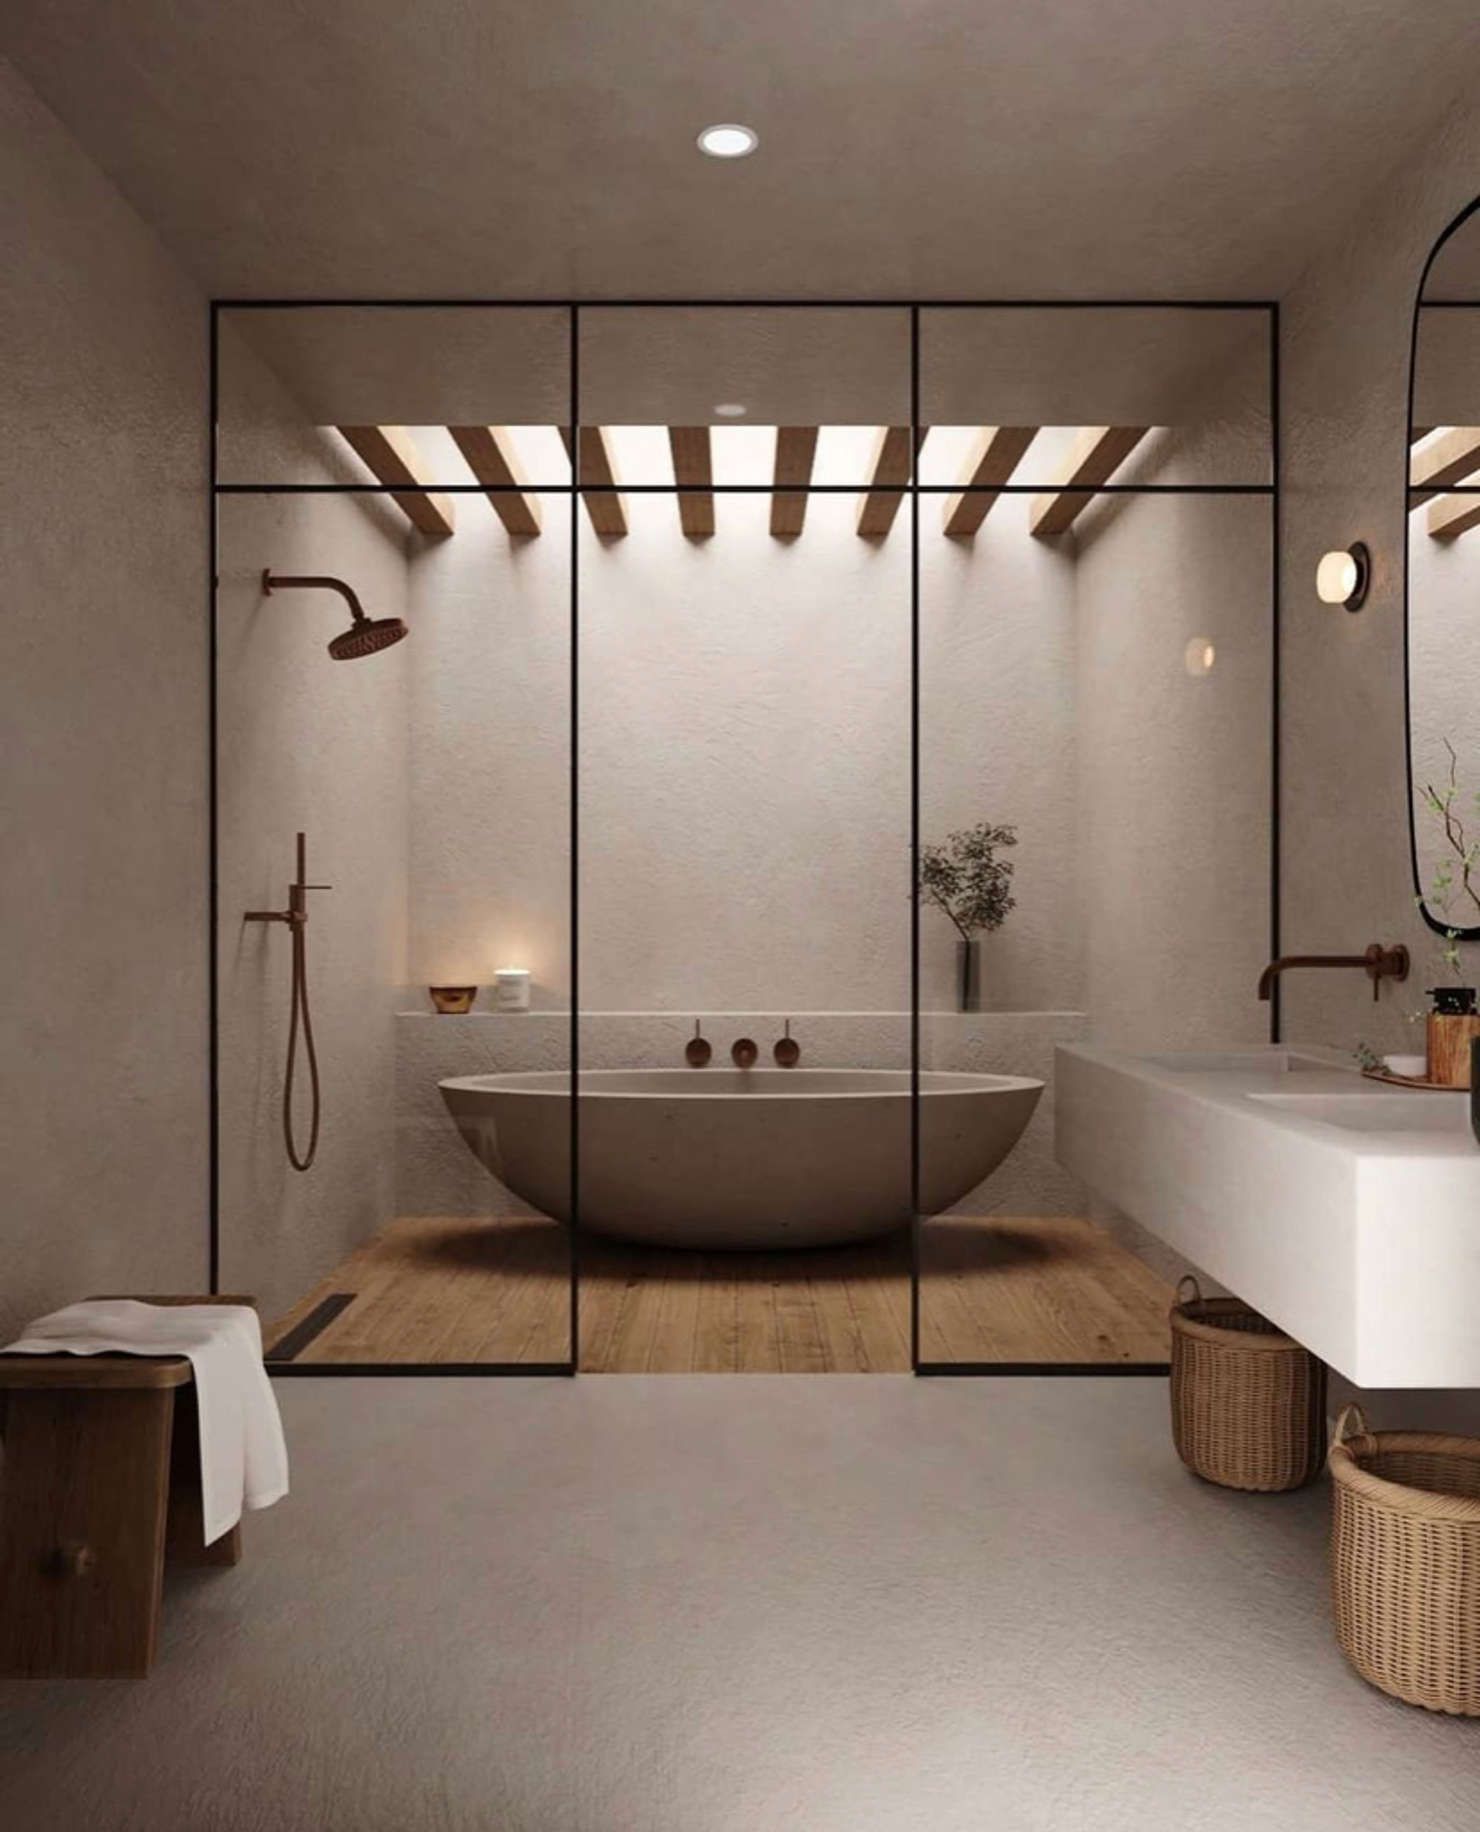 Redefine Your Space with Stunning Bathroom Designs